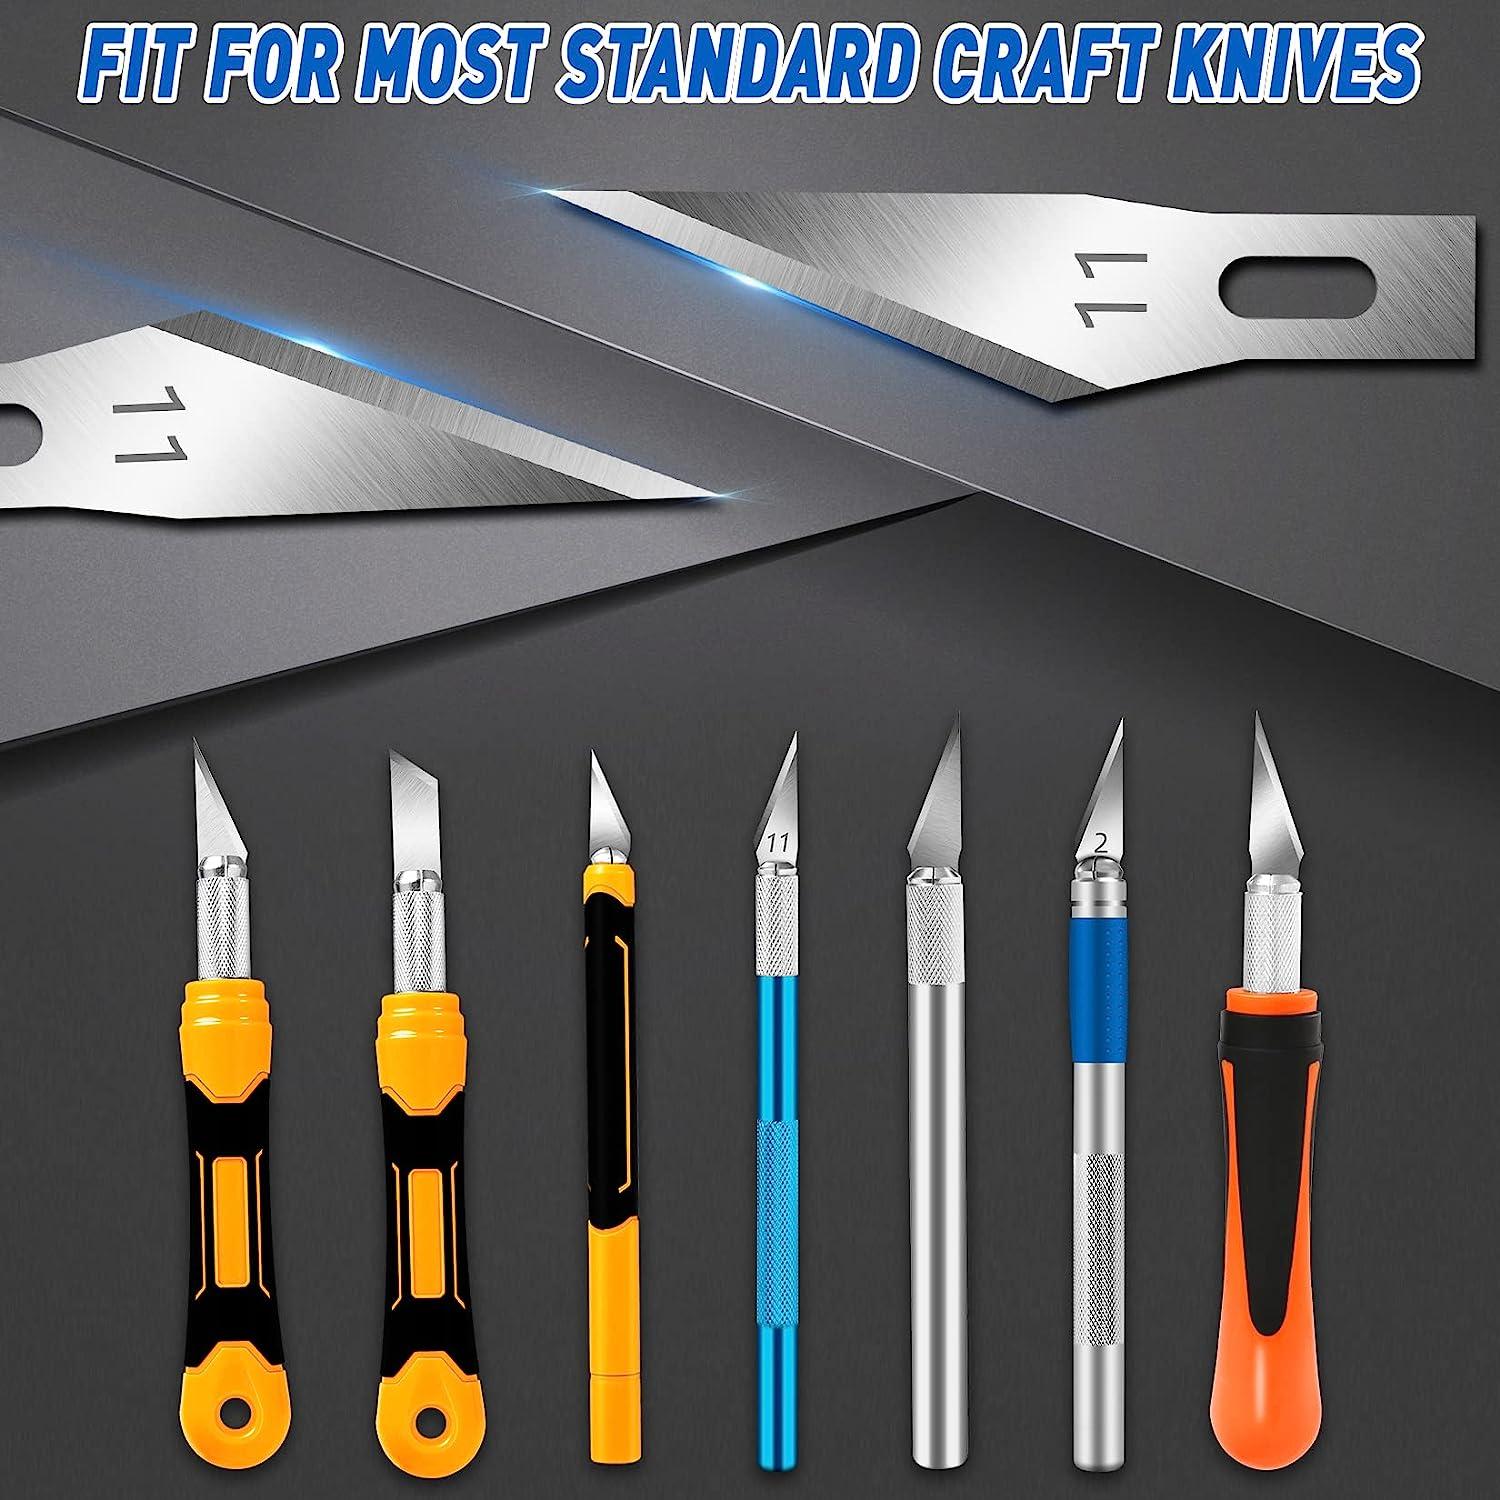 Xacto Knife with Chisel Blades | ProPTN